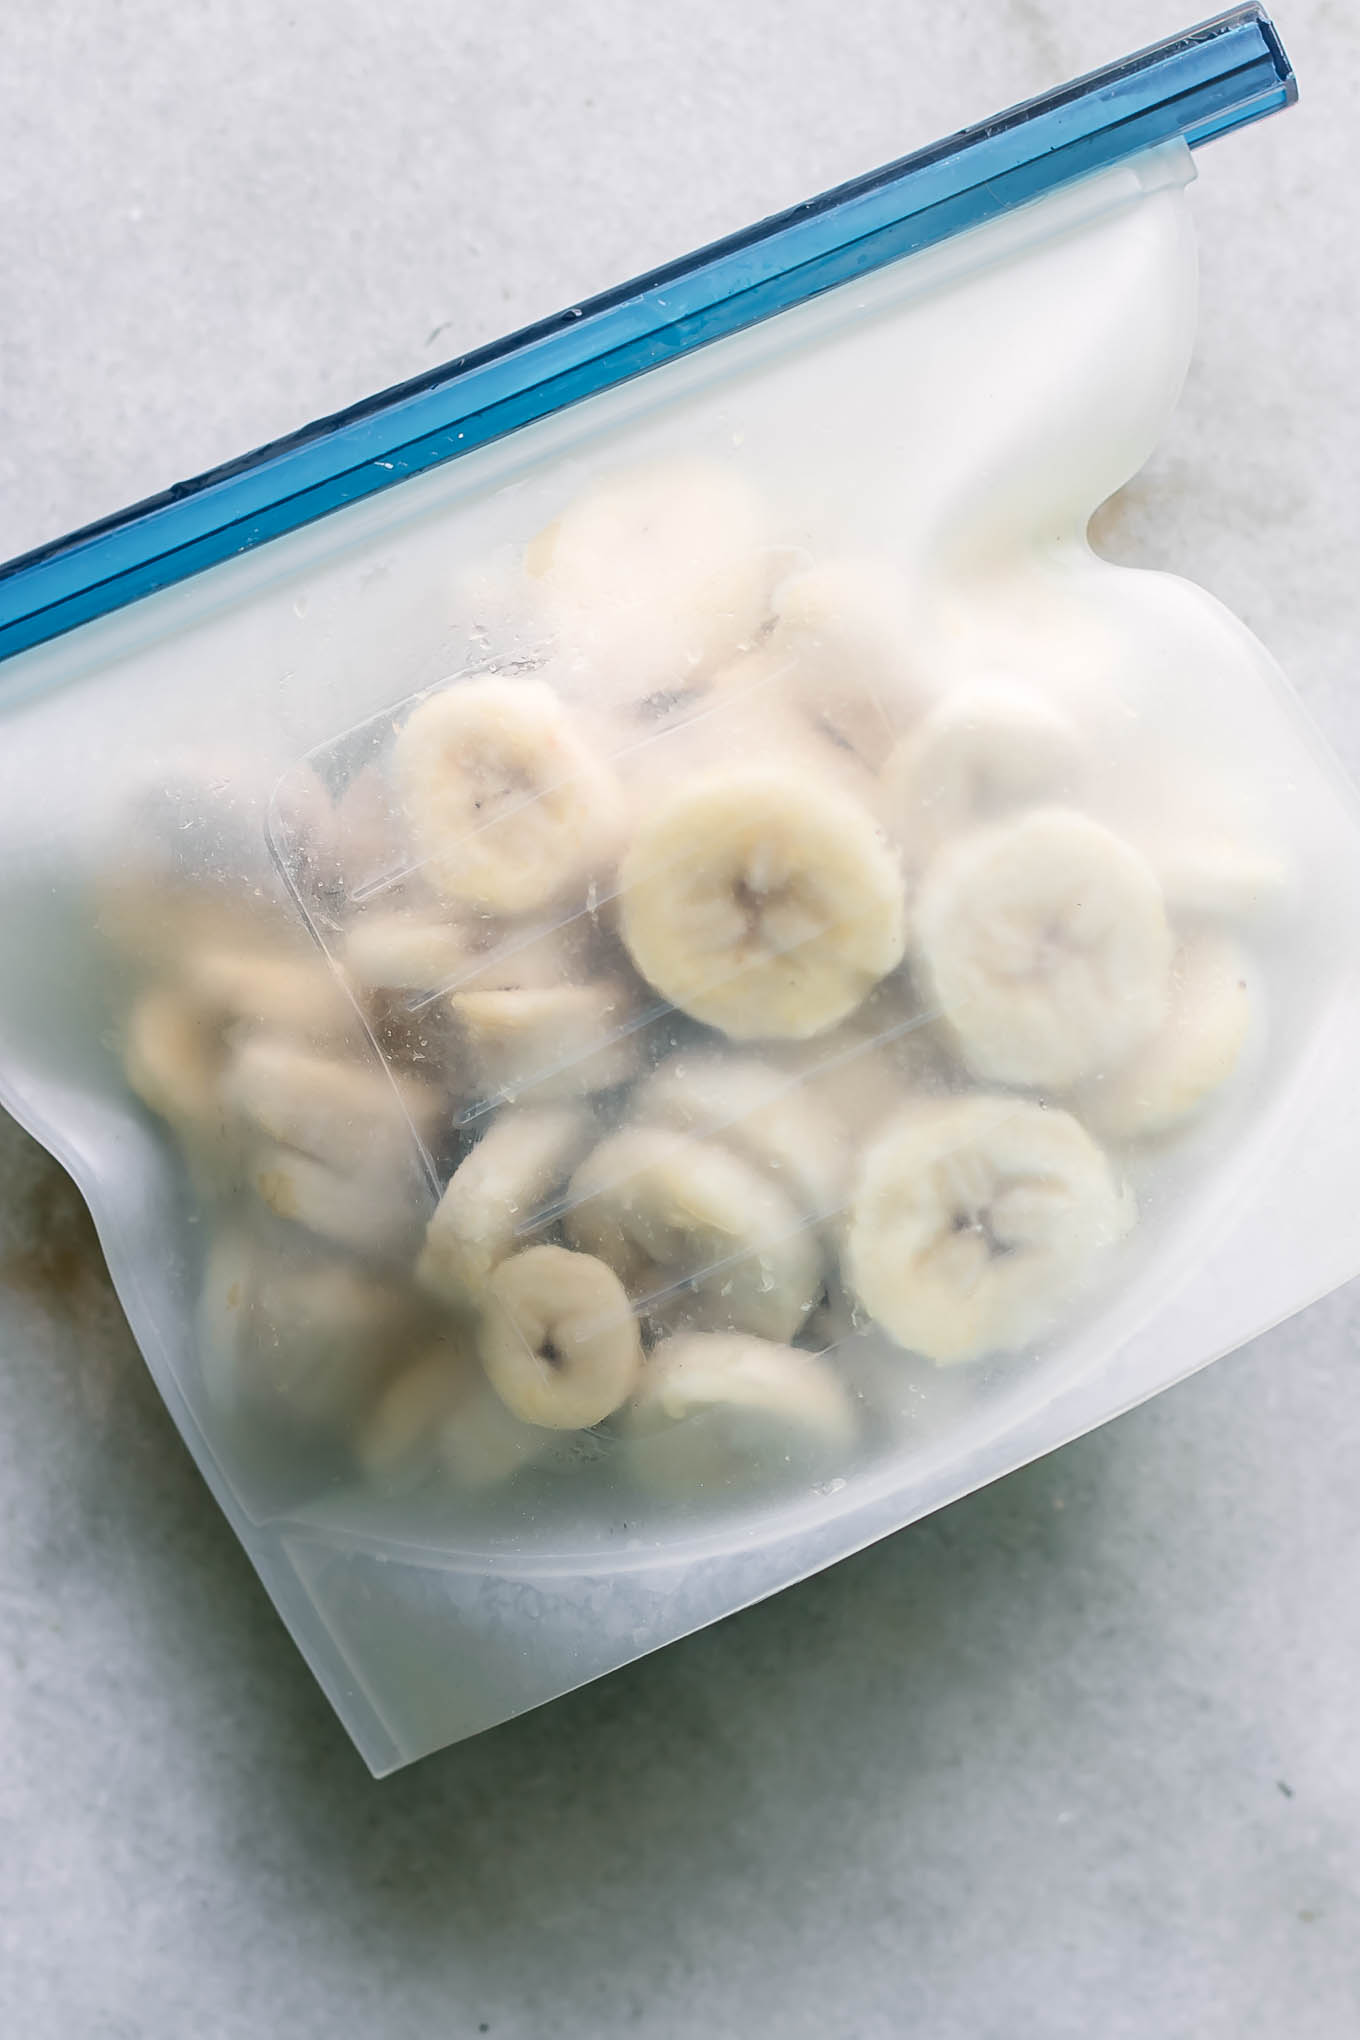 frozen banana slices in a silicone freezer bag on a white table